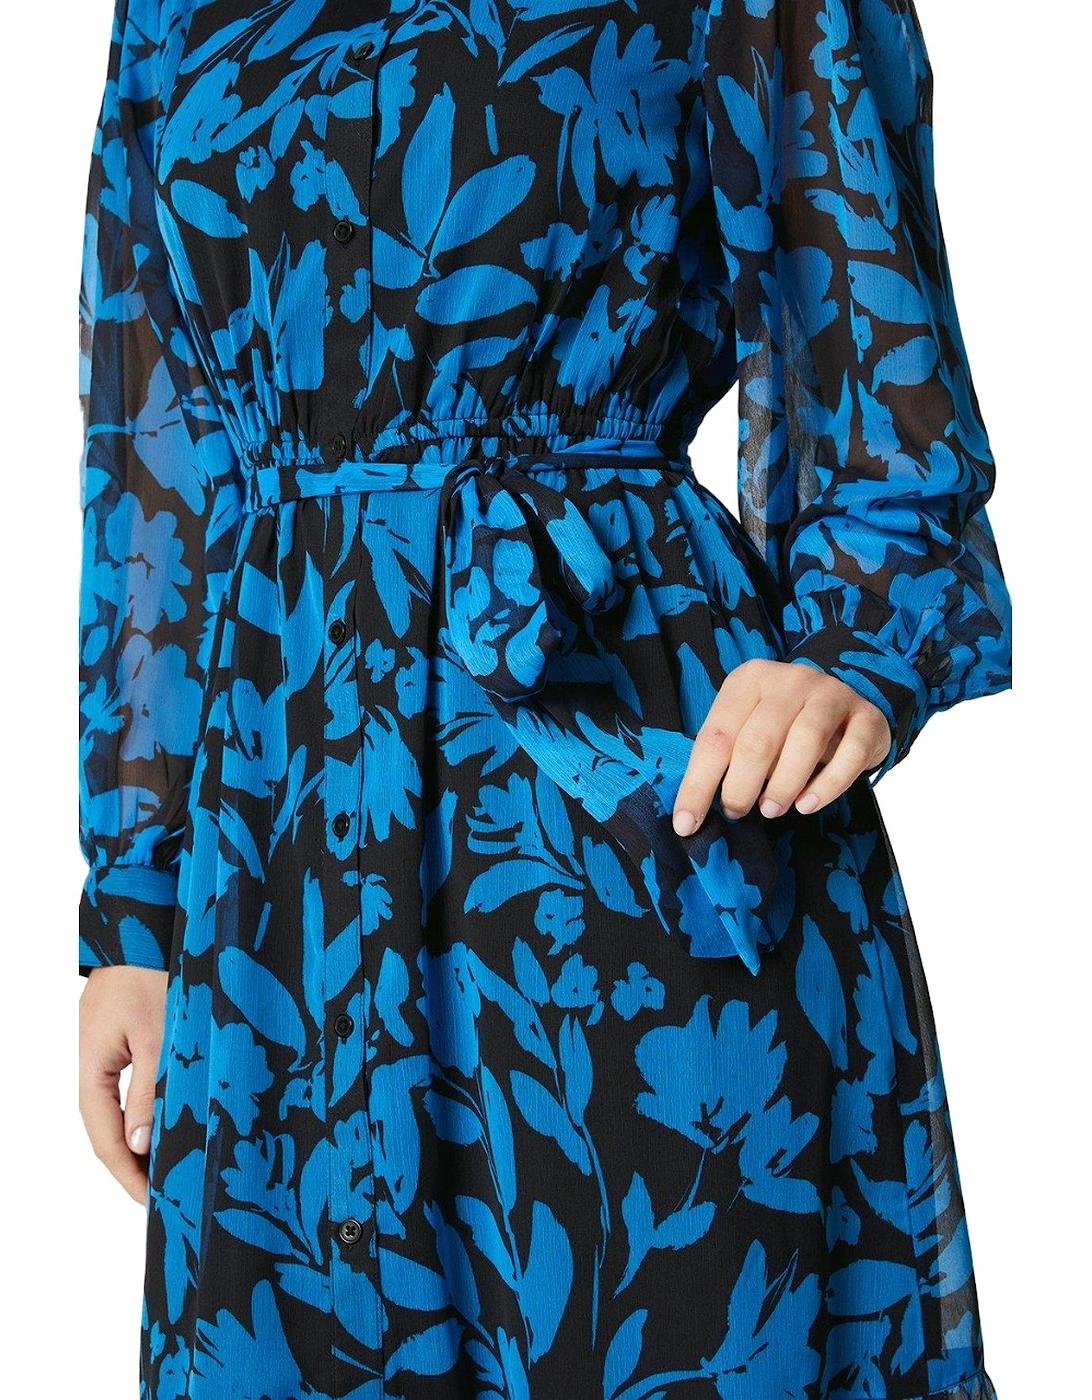 Womens/Ladies Floral Tiered Shirt Dress